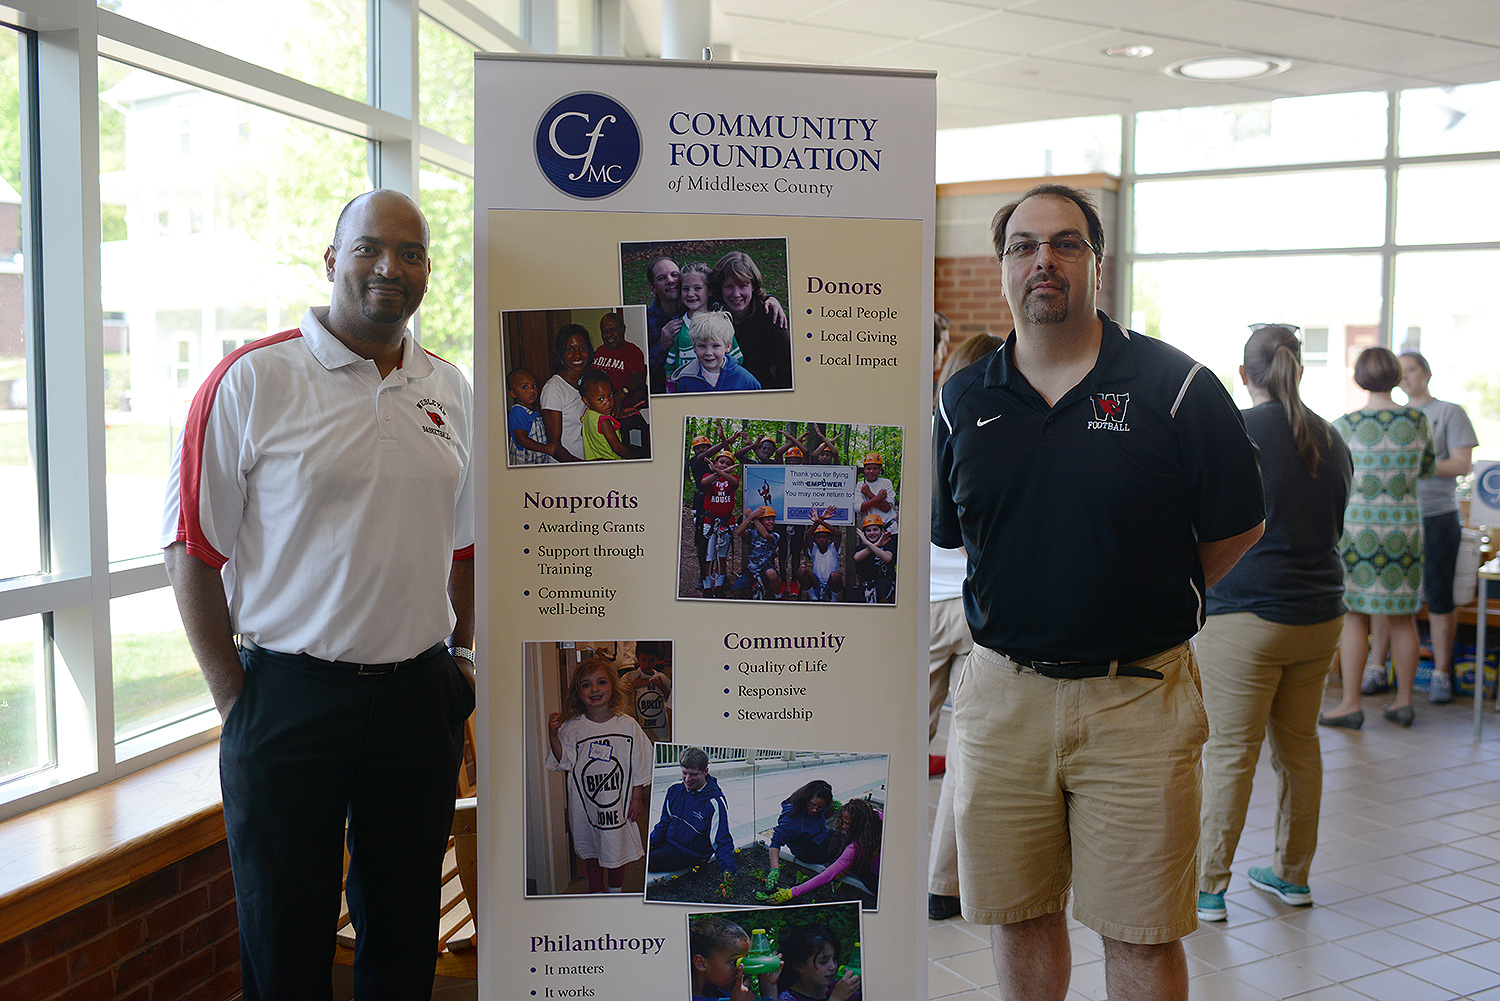 Frantz Williams (left) and Jeff McDonald hosted the event with CFMC in Freeman Athletic Center